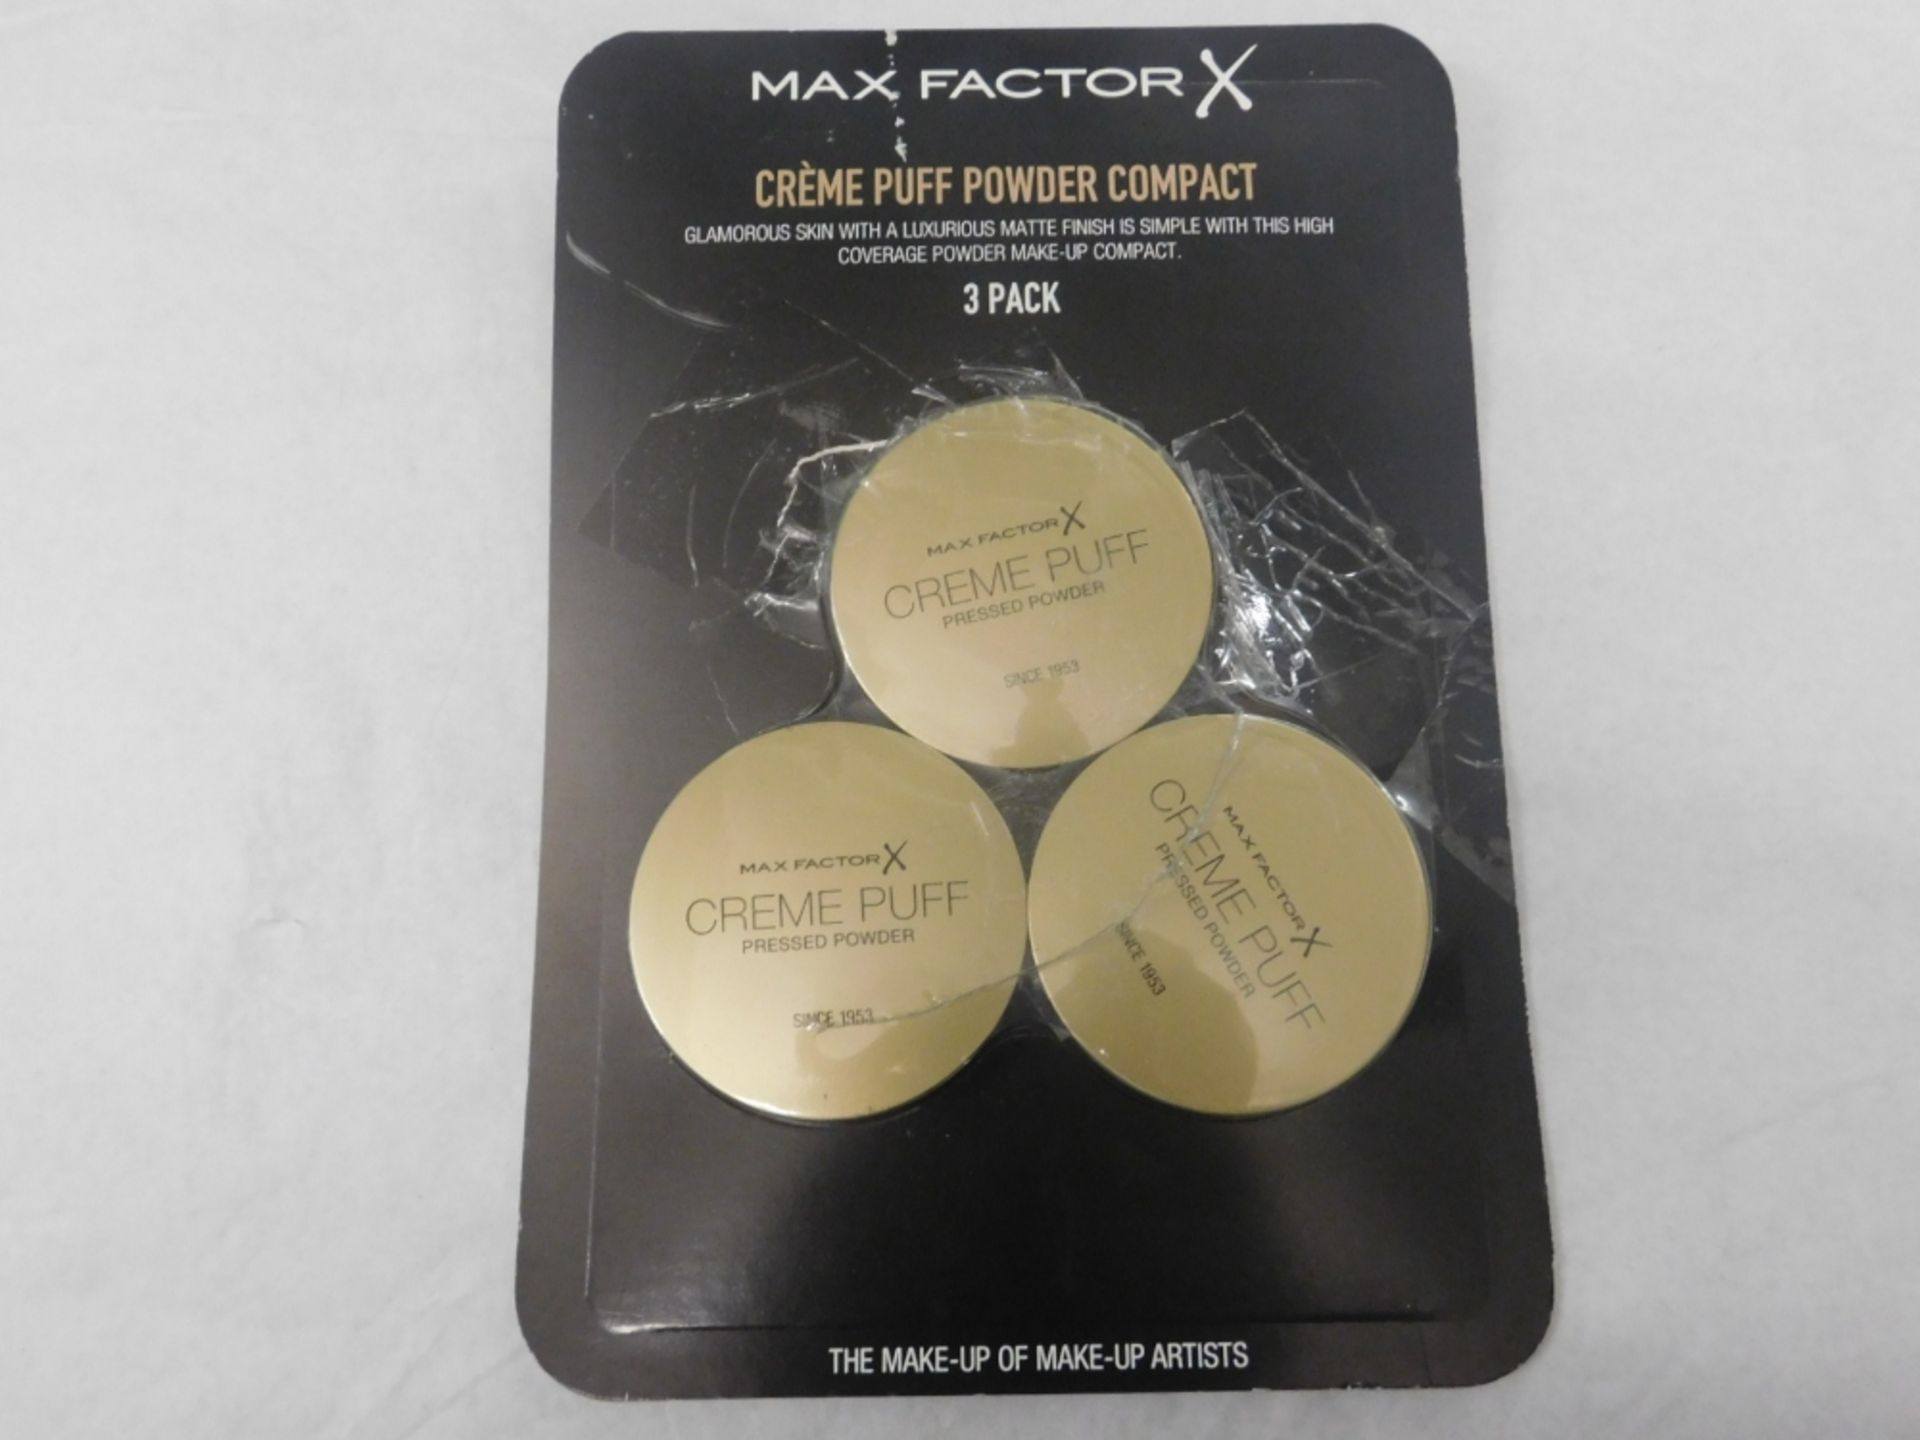 1 MAX FACTOR X CREME PUFF POWDER COMPACT 3 PACK RRP £29.99